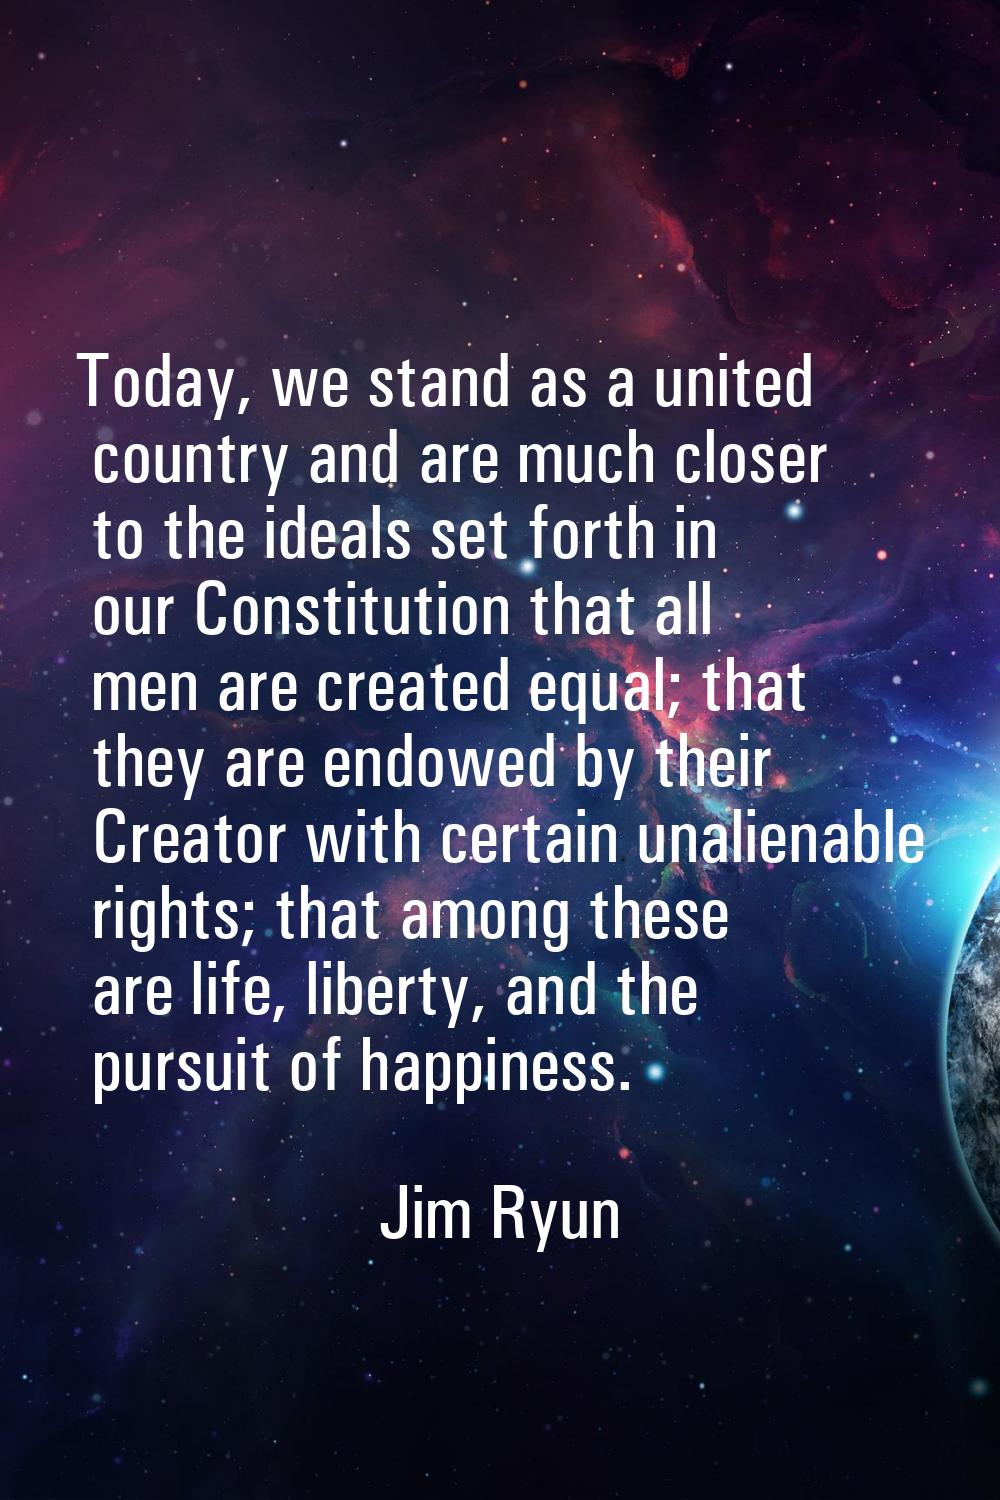 Today, we stand as a united country and are much closer to the ideals set forth in our Constitution